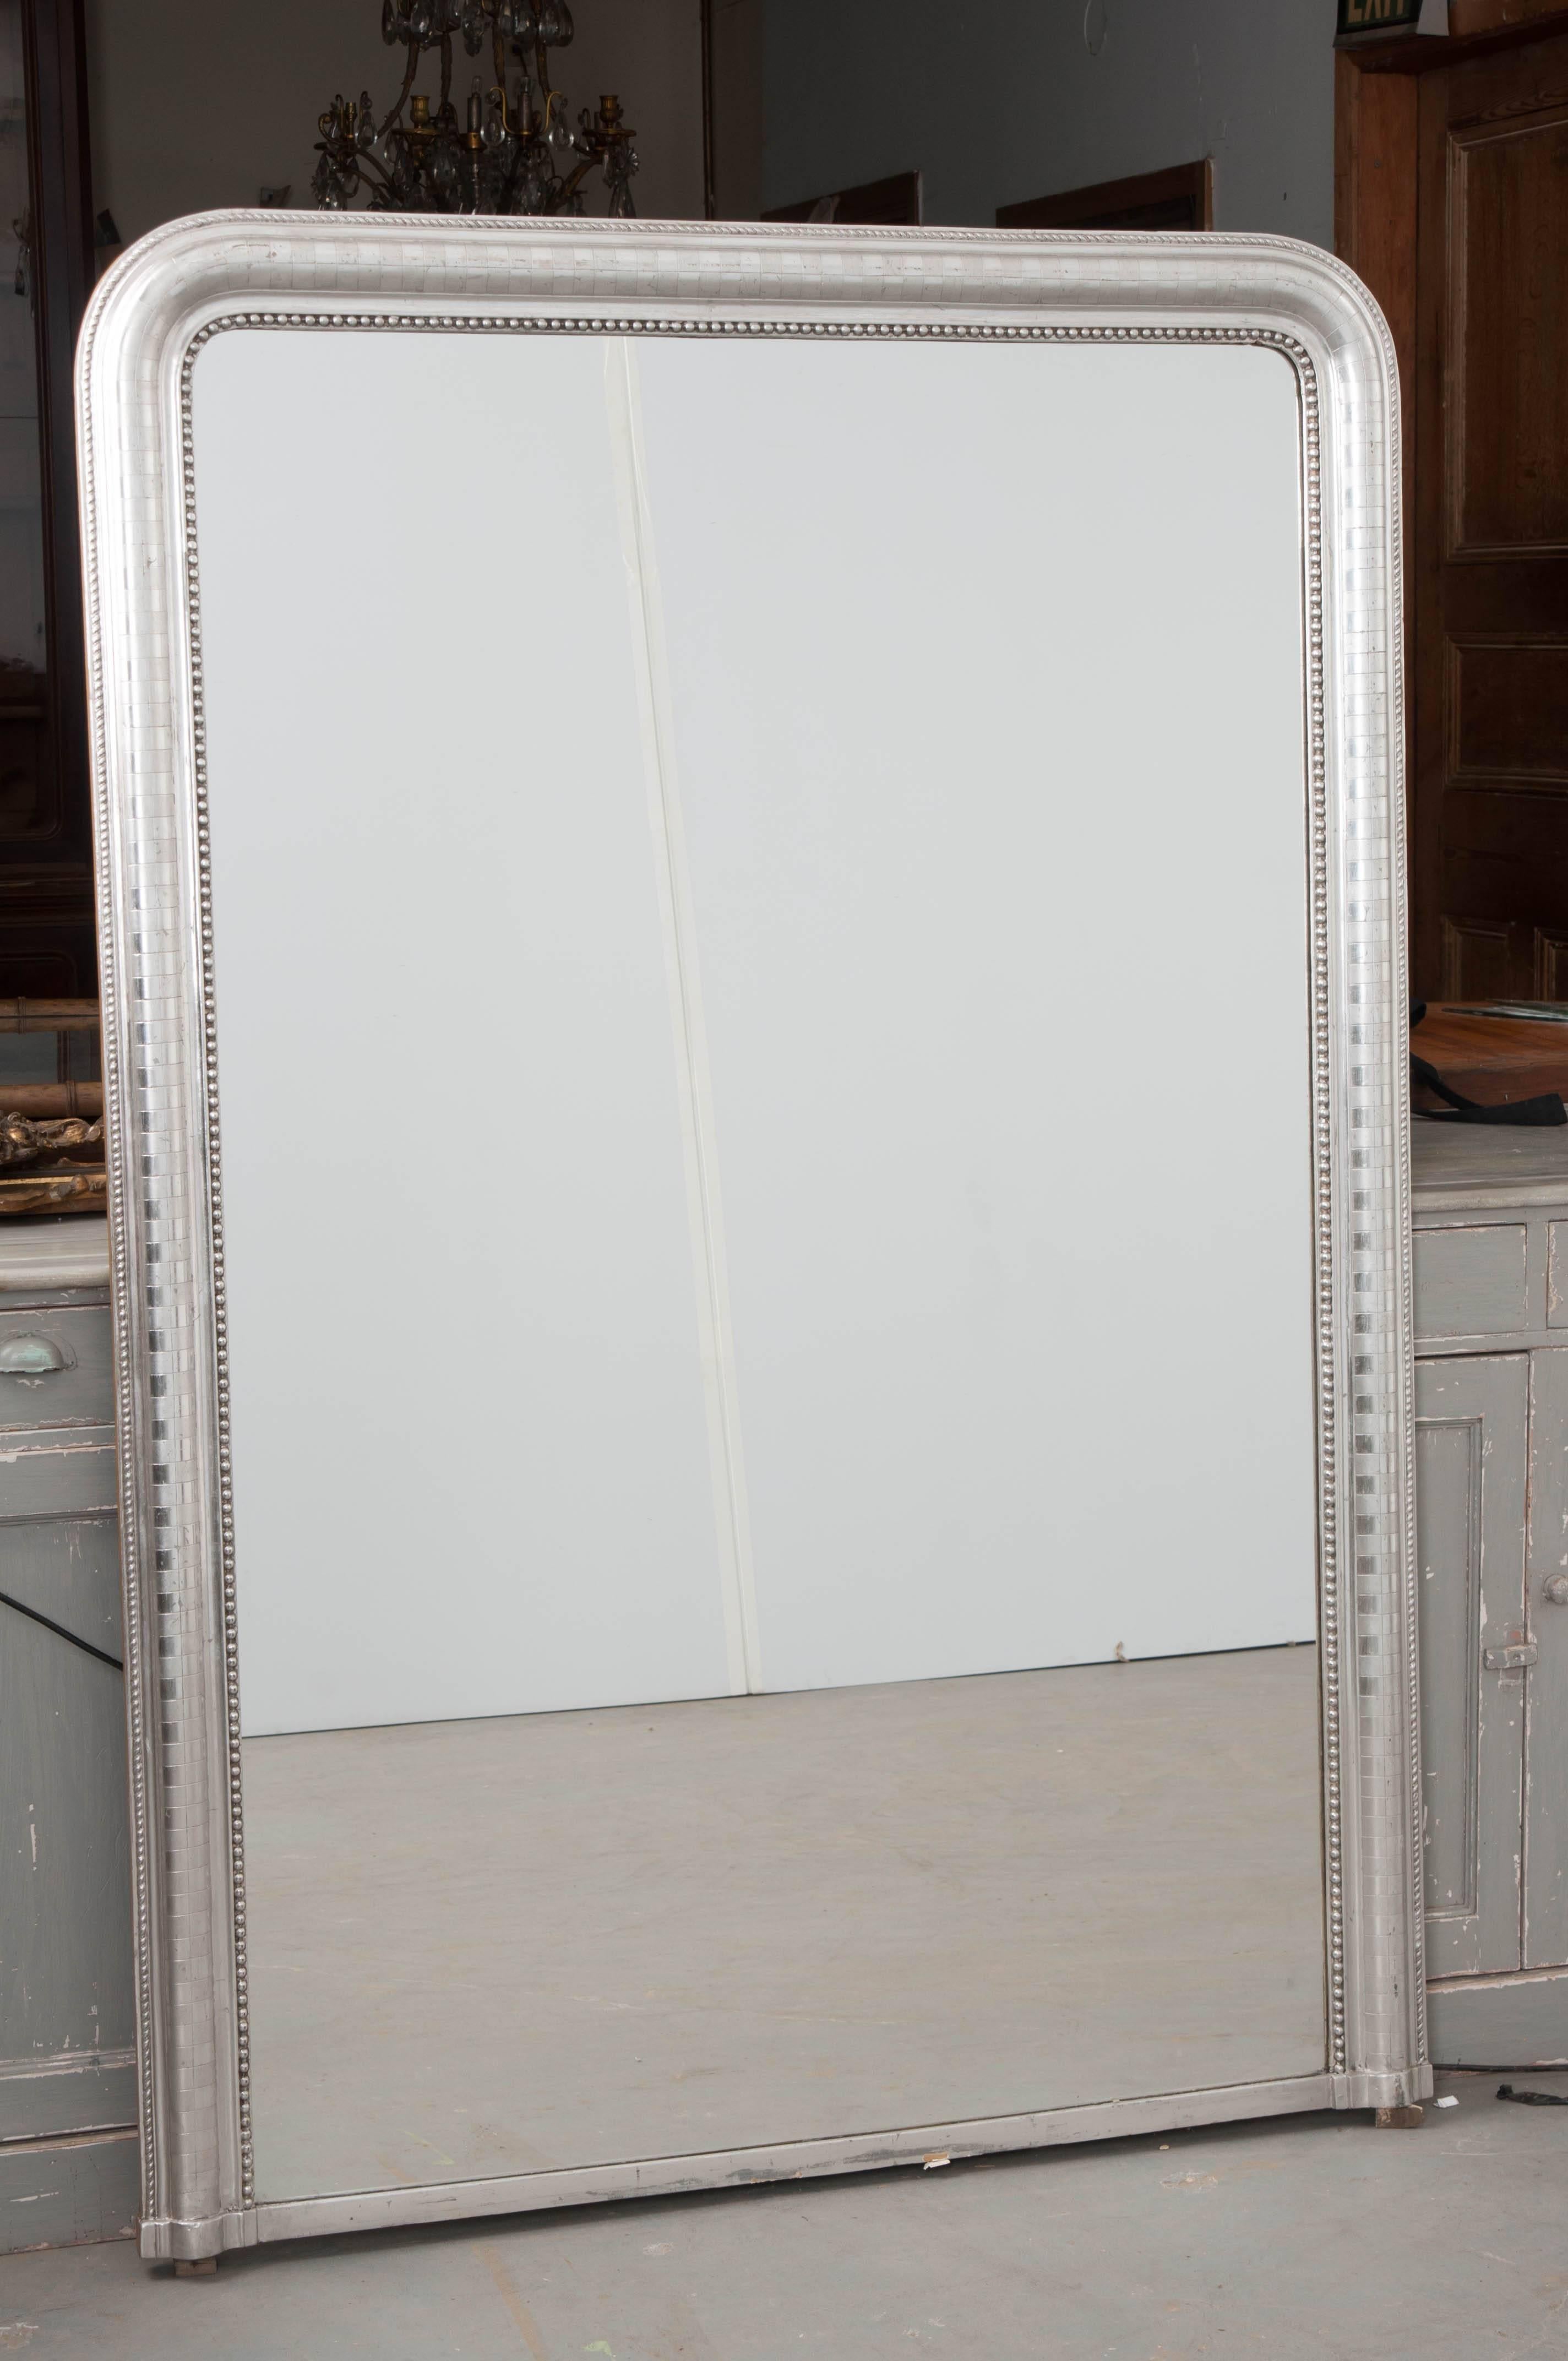 A gorgeous, large silver gilt mirror, made in France, circa 1880. This tall, wide mirror is done in the Classic Louis Philippe style. The frame has been finished in silver gilt that is in remarkable antique condition. The gilt gleams in the light